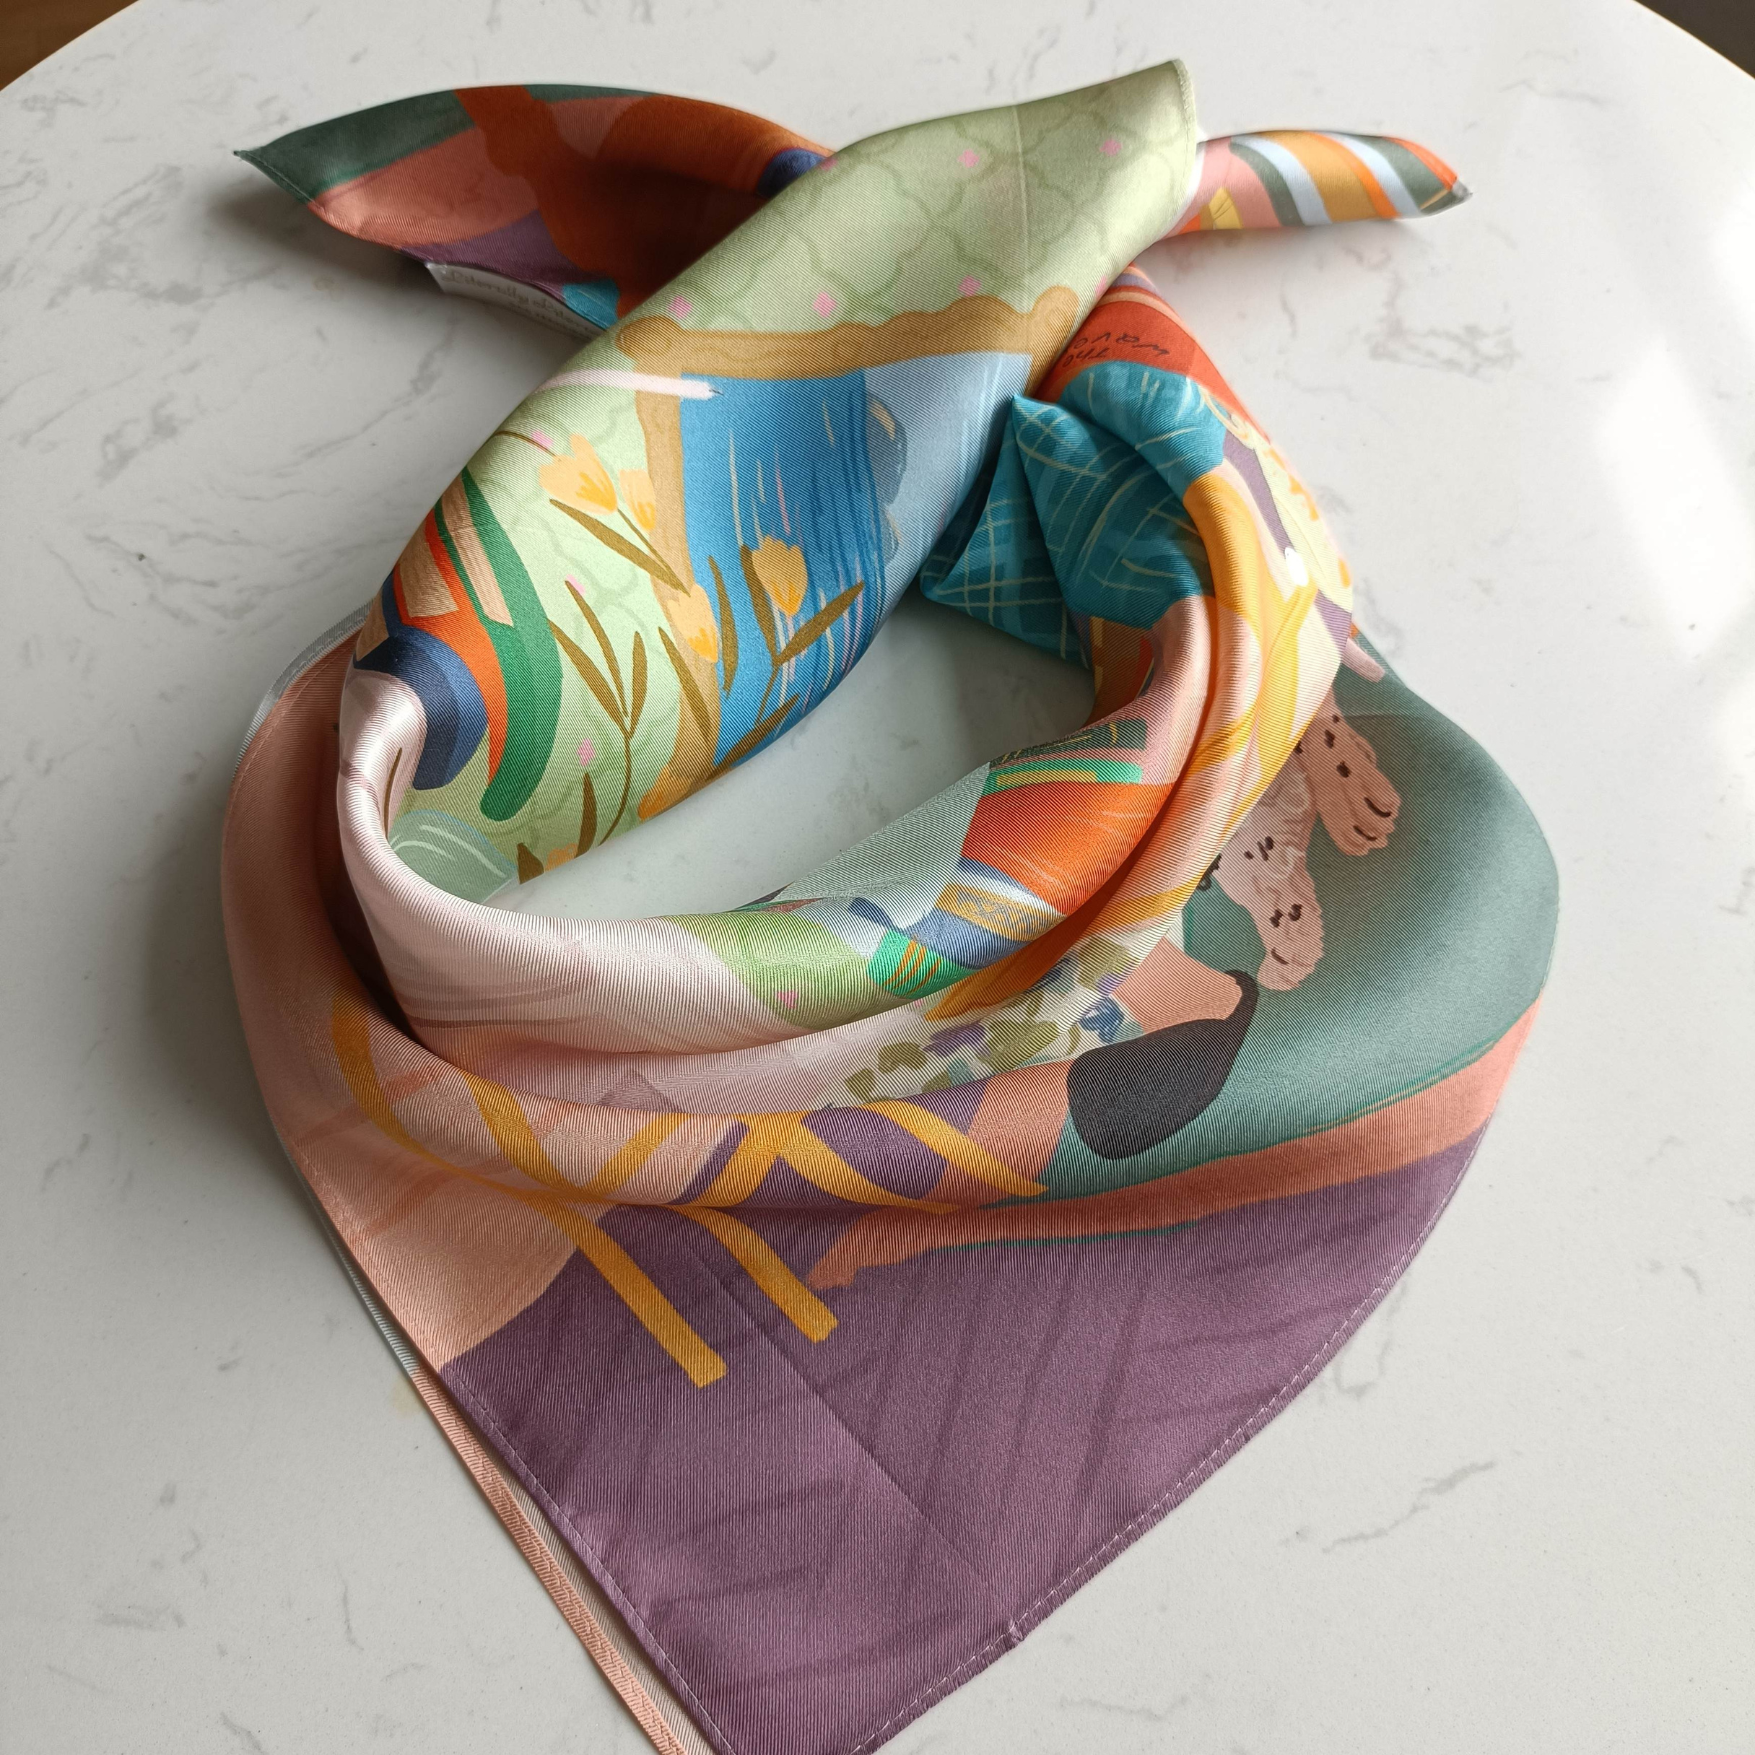 Silk scarf featuring a portrait of Virginia Woolf sitting in an armchair surrounded by books, with a dog at her feet